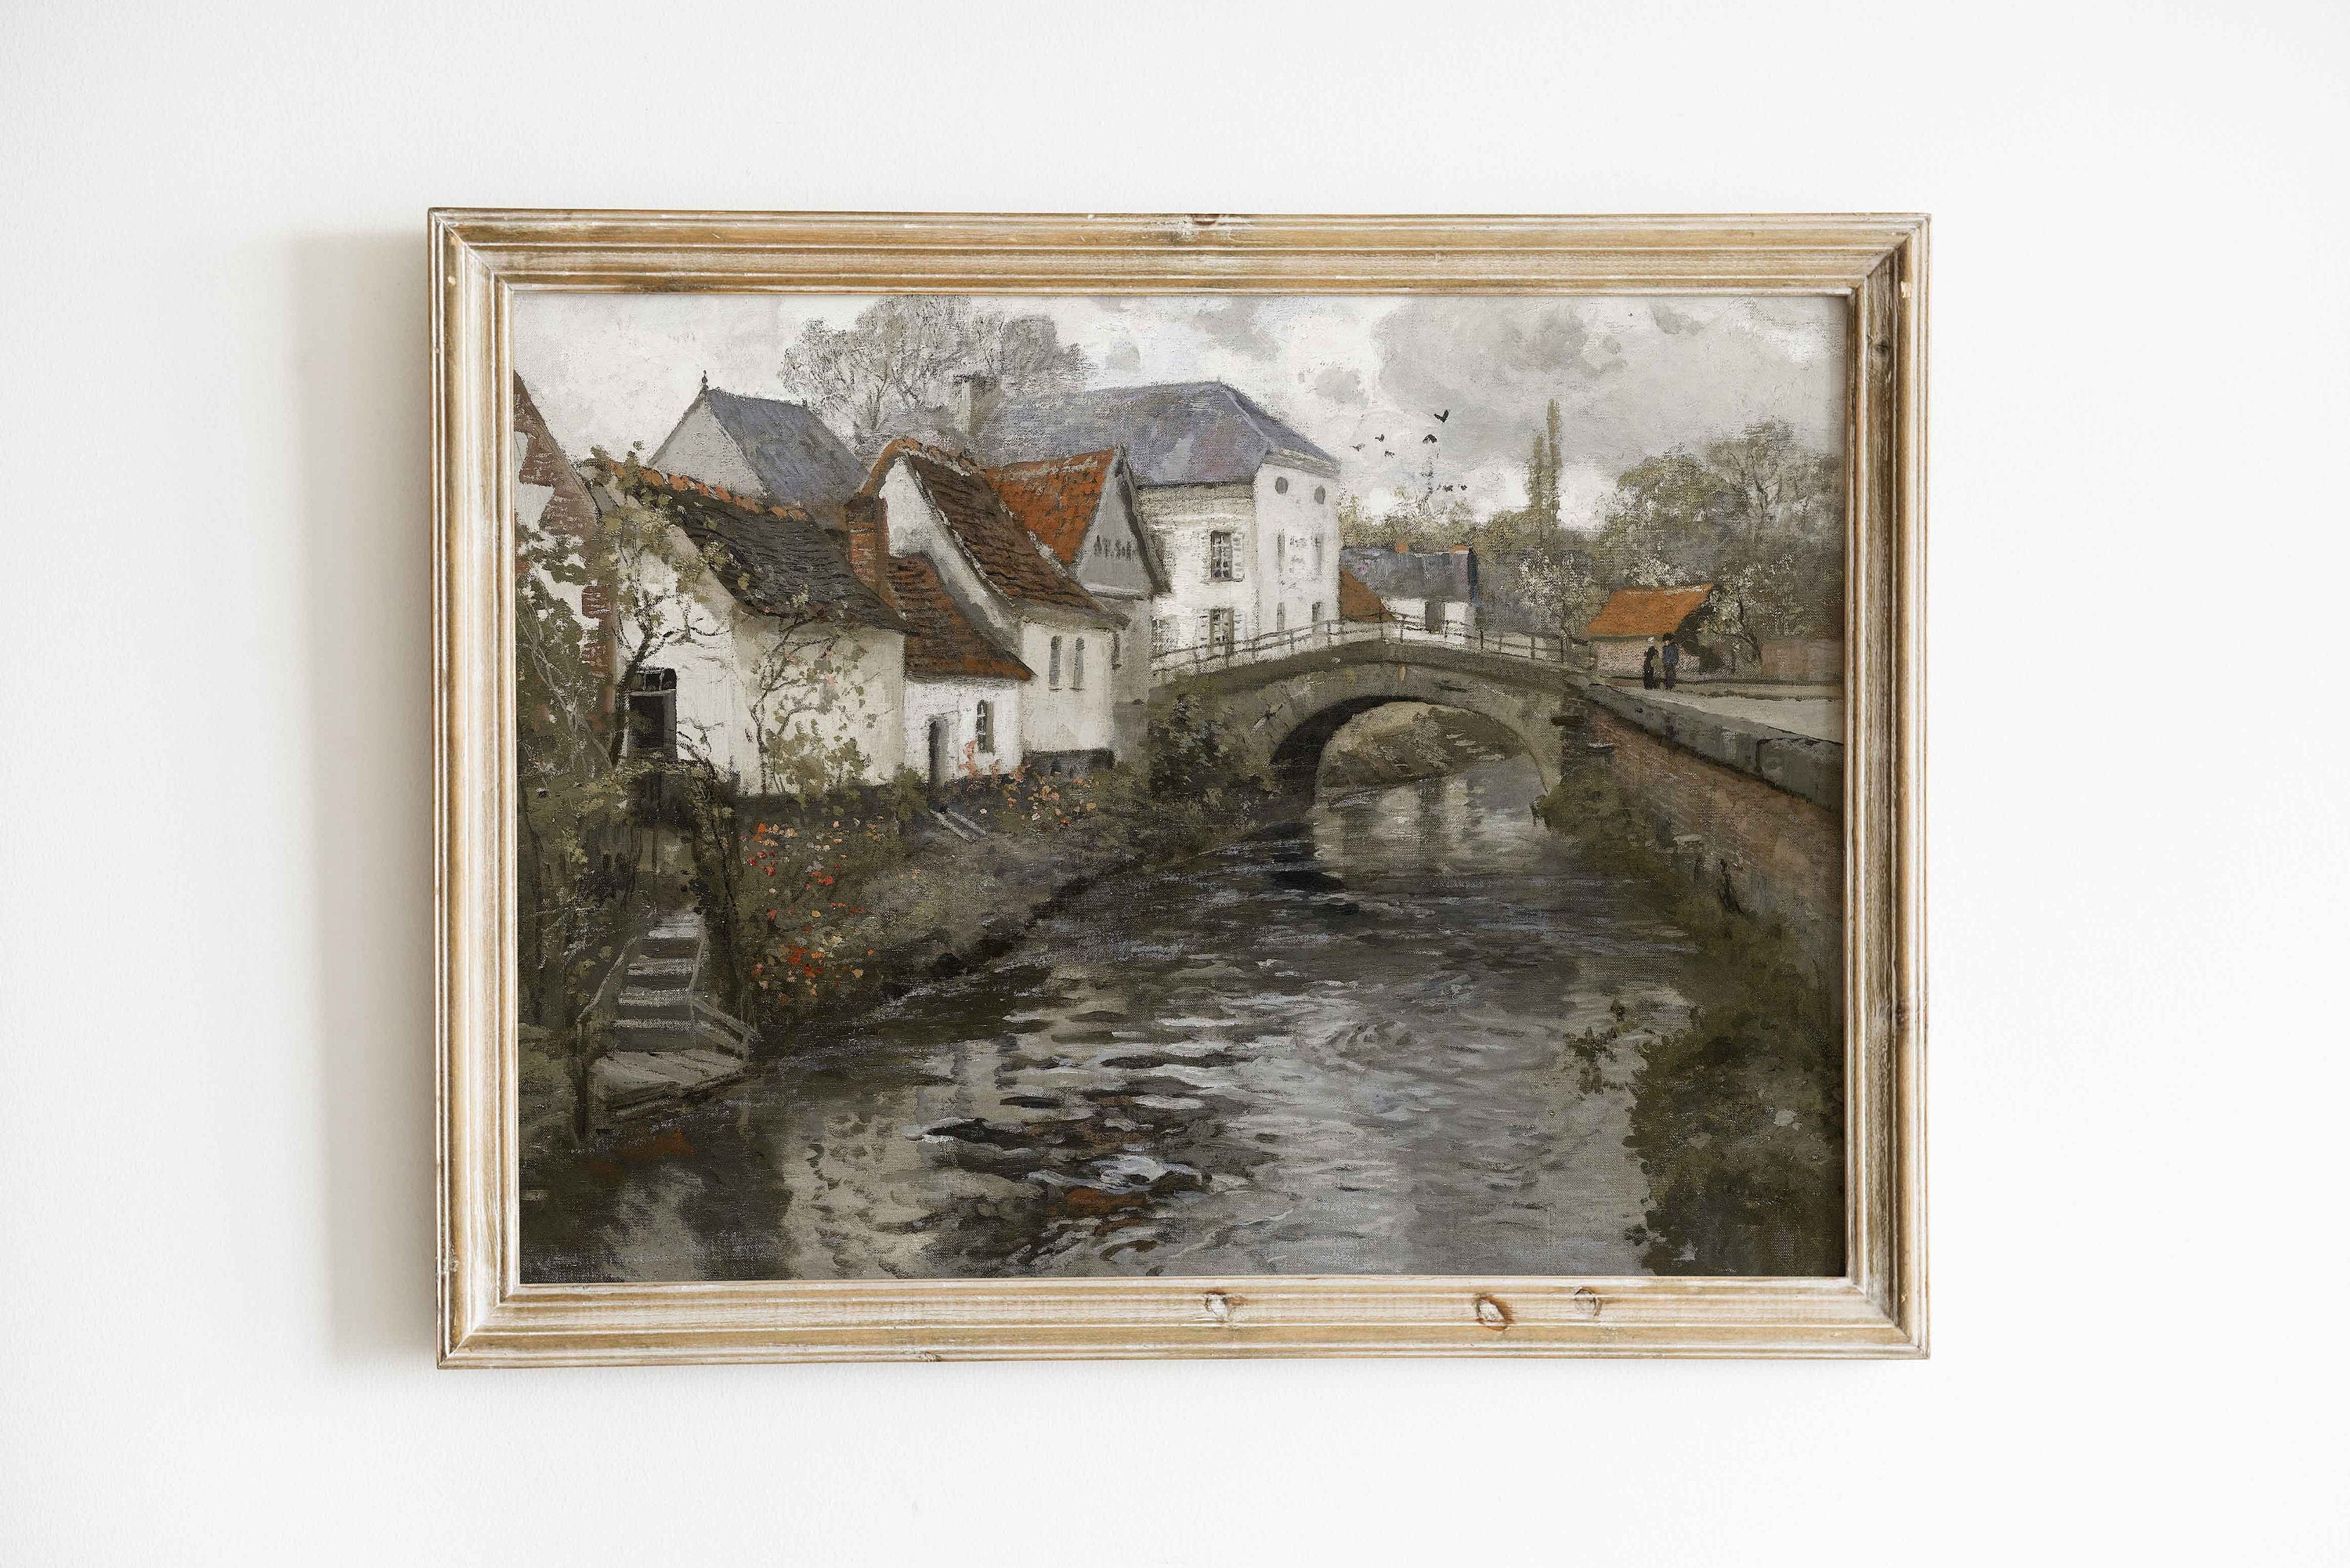 Small town near La Panne by the Norwegian impressionist Frits Thaulow during the 19 century